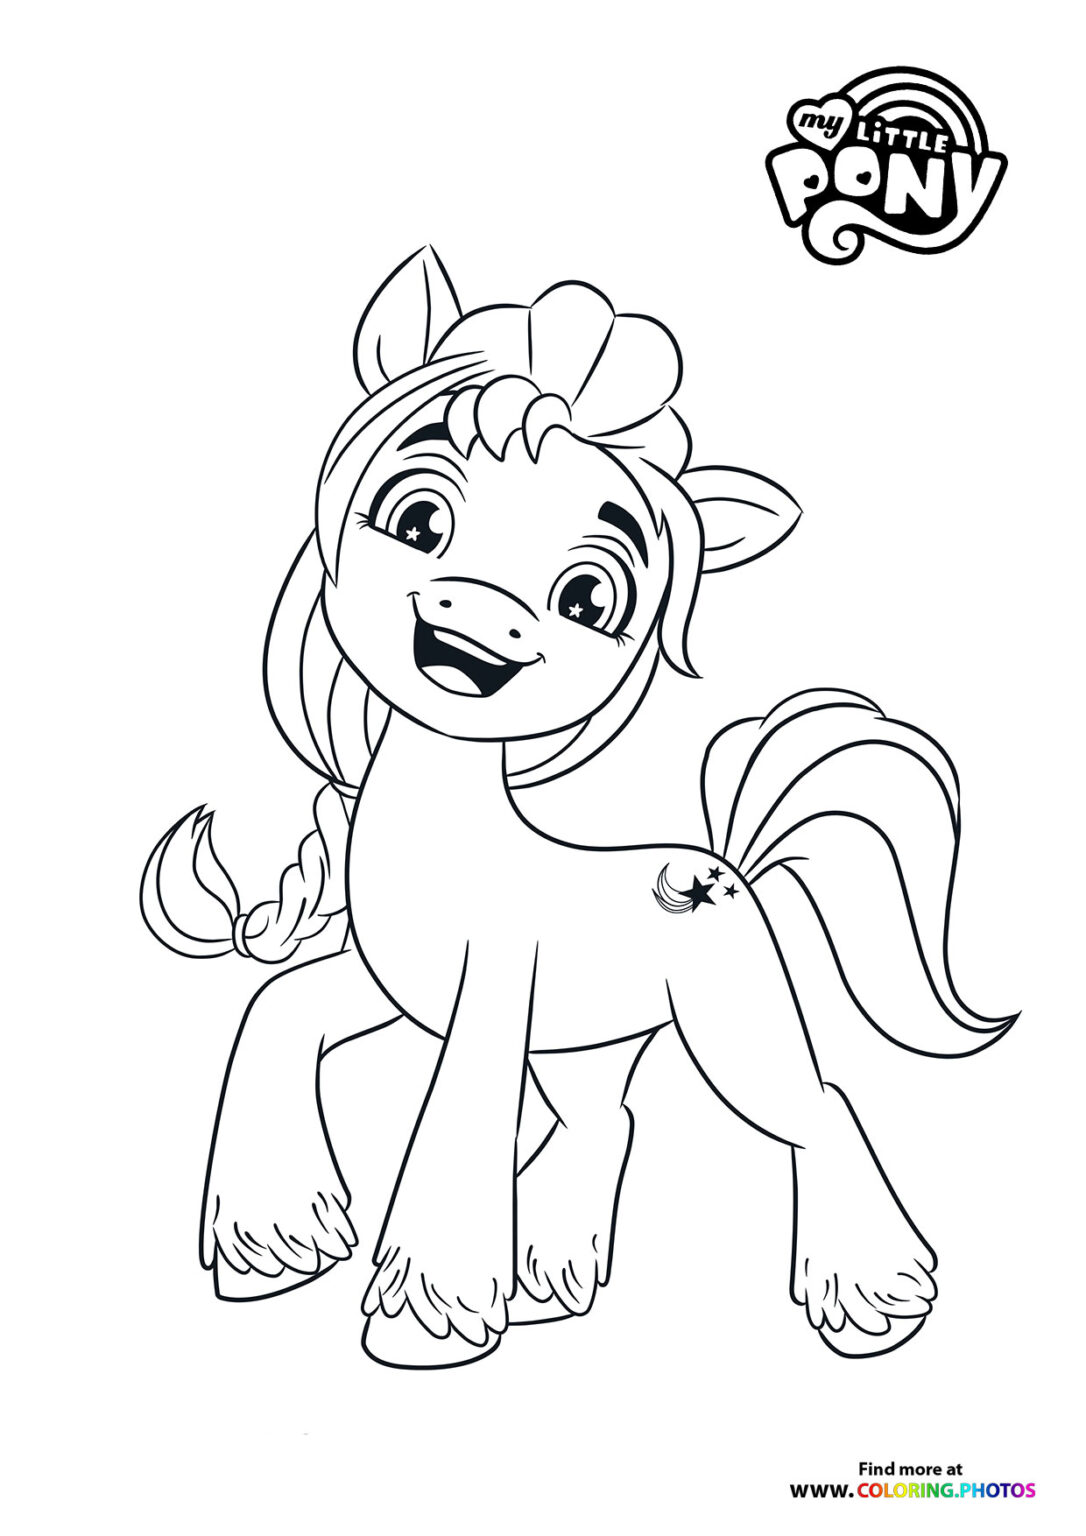 Bridlewood - My Little Pony - A New Generation - Coloring Pages for kids